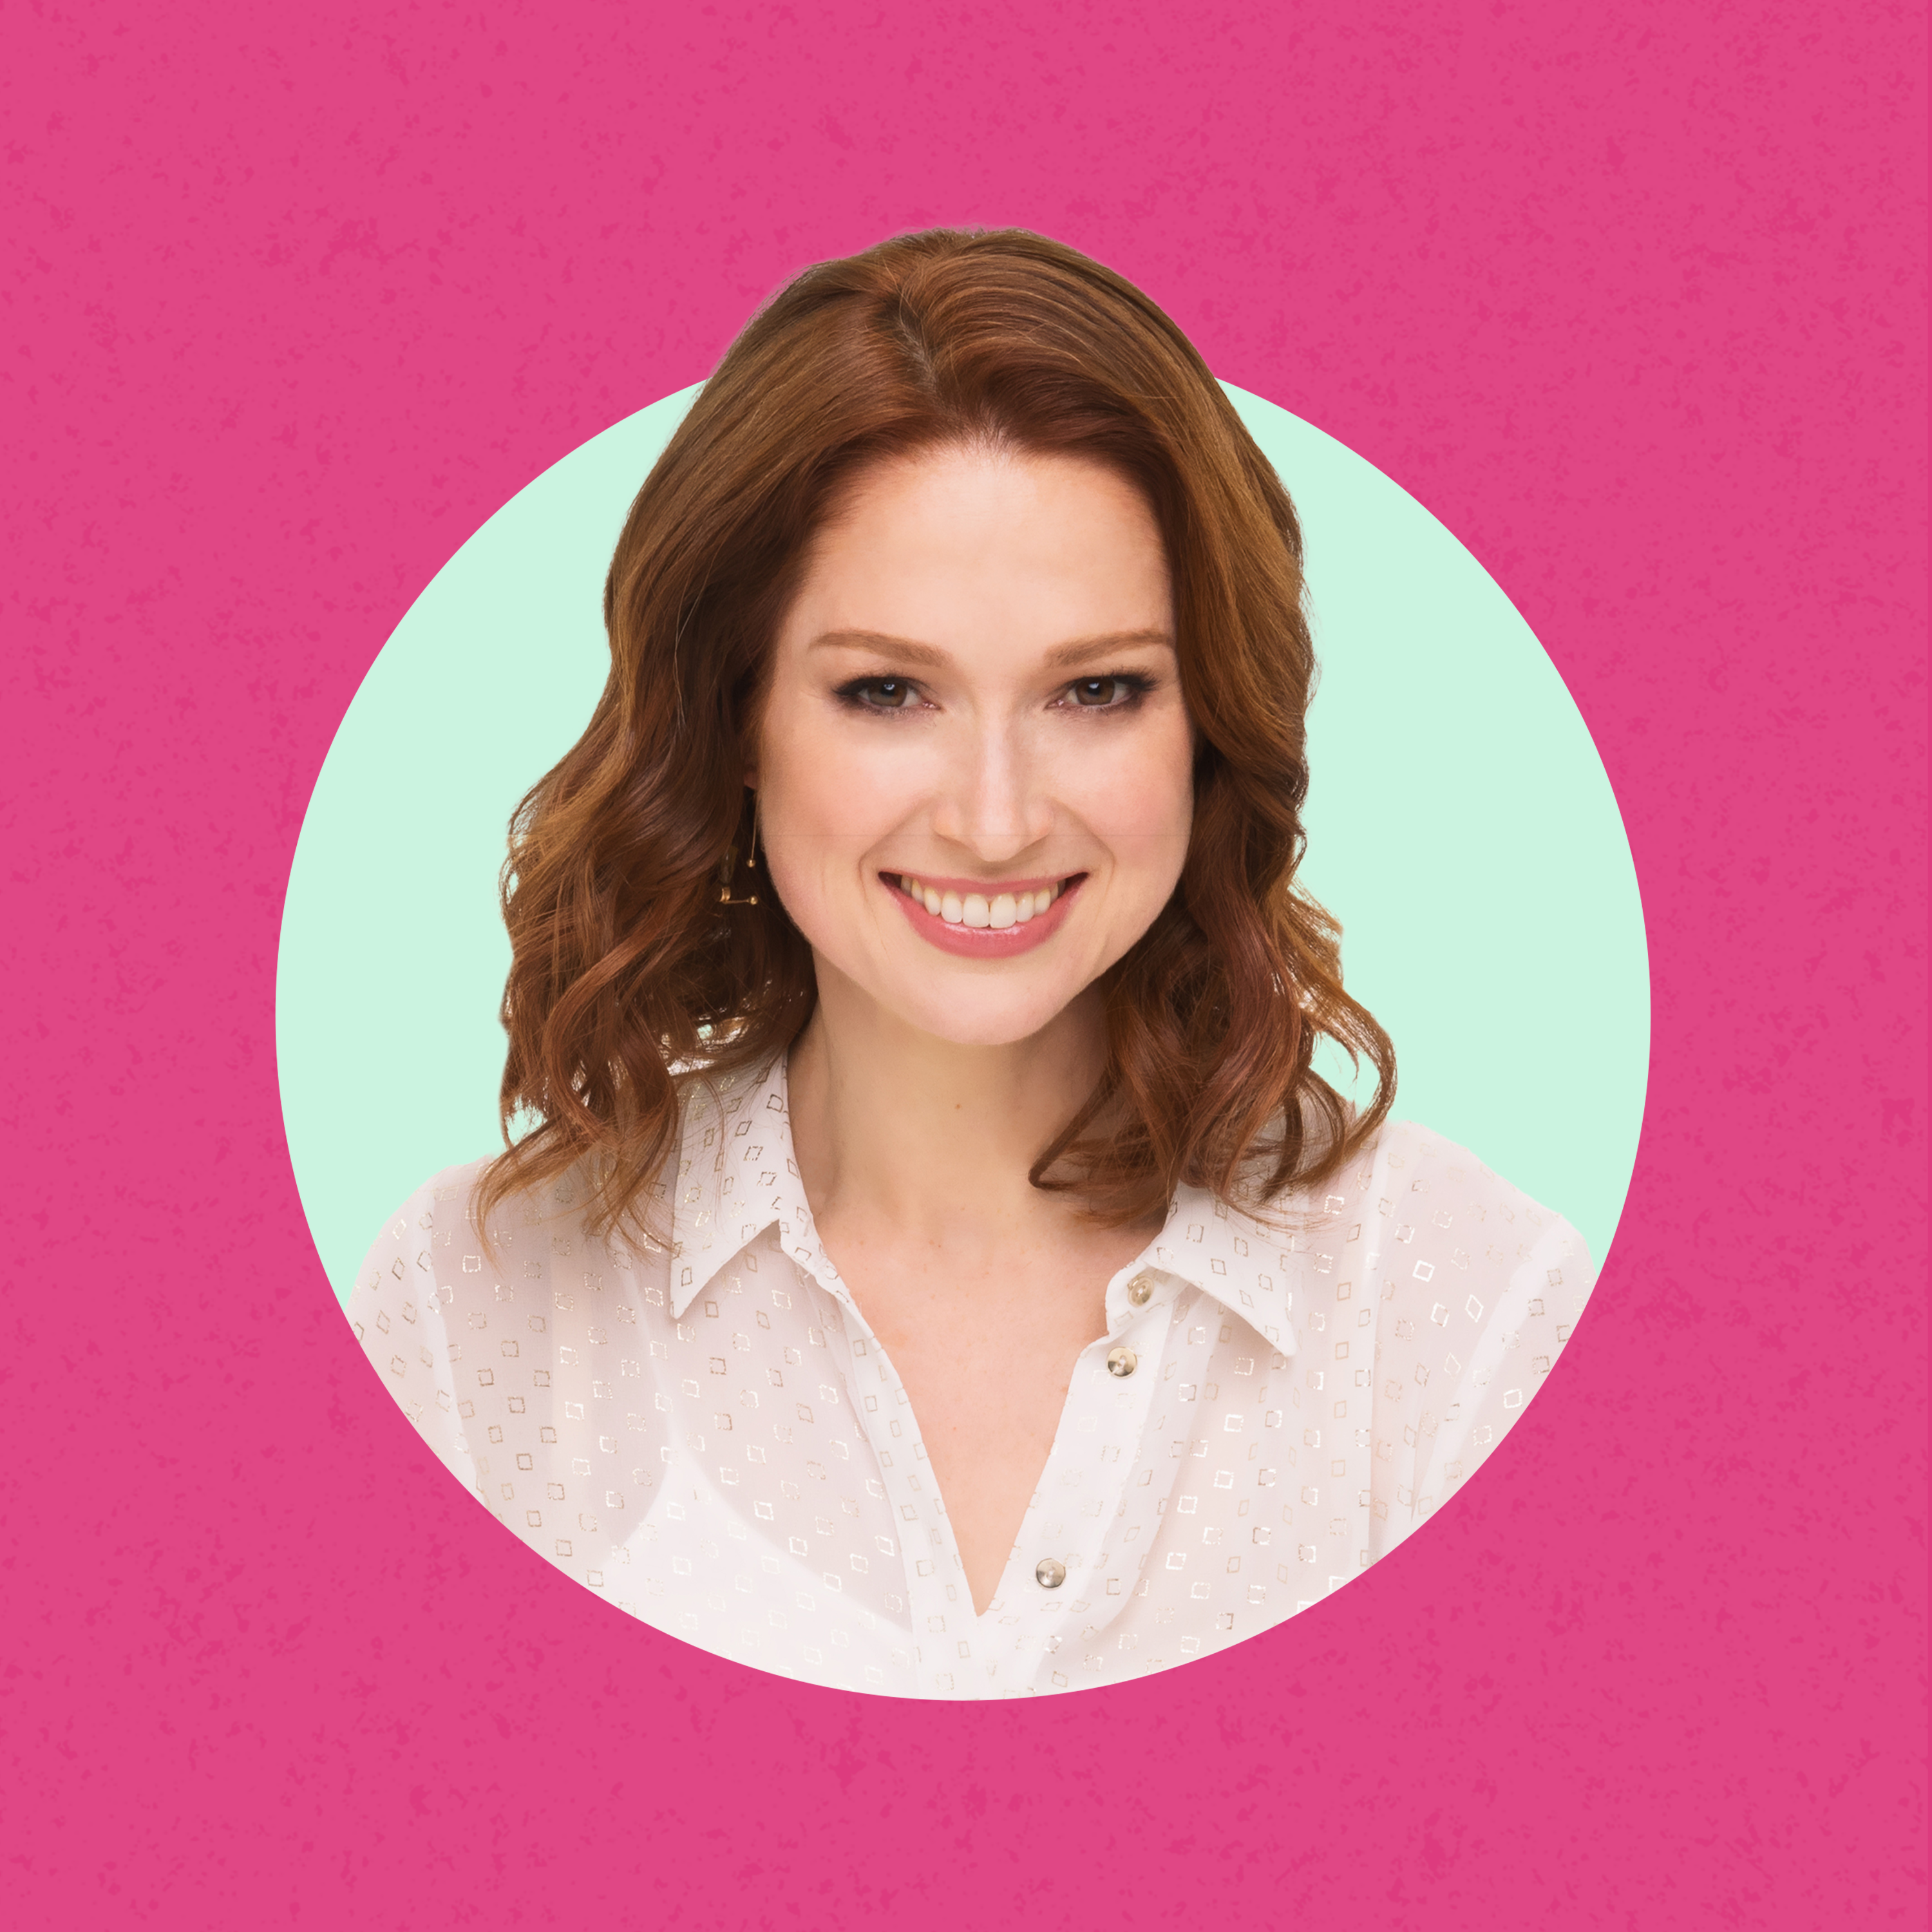 Star on Broadway or Bail? (with Ellie Kemper)